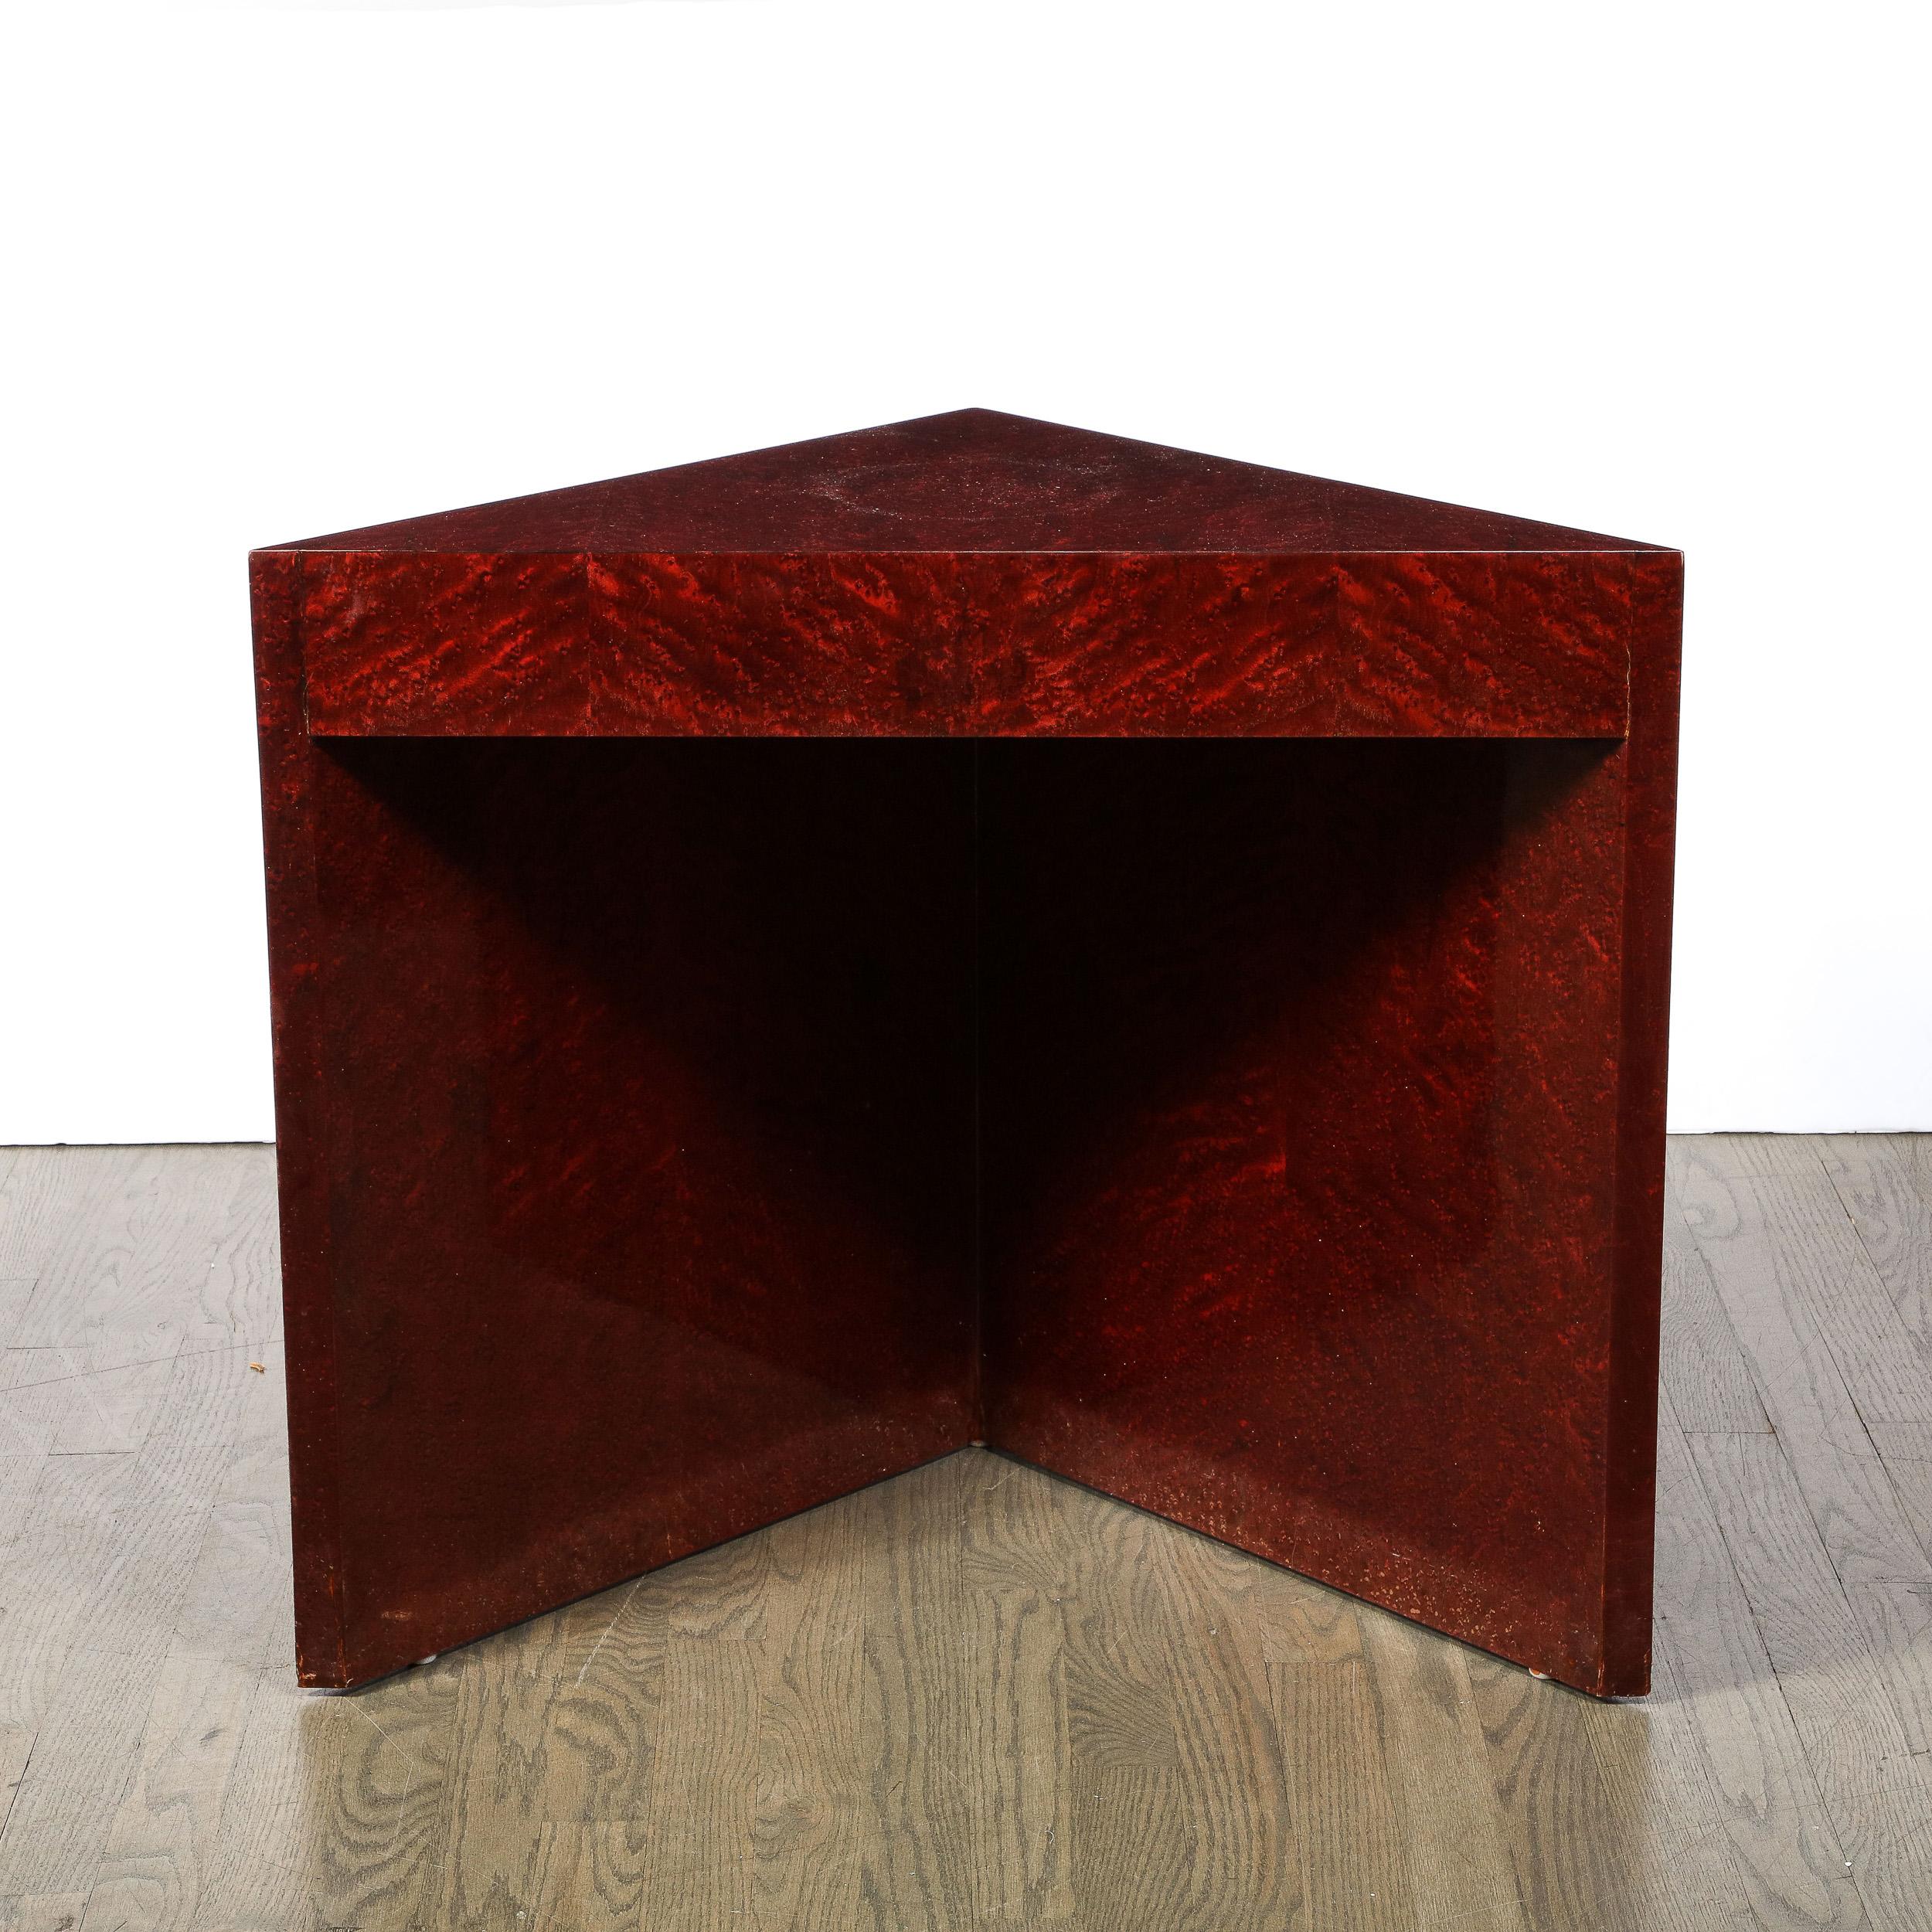 This graphic and refined modernist side/ accent table was realized in the United States  by Pace Created by two adjoined volumetric rectilinear burled walnut pieces that meet at a right angle and capped with a triangular top in the same material,